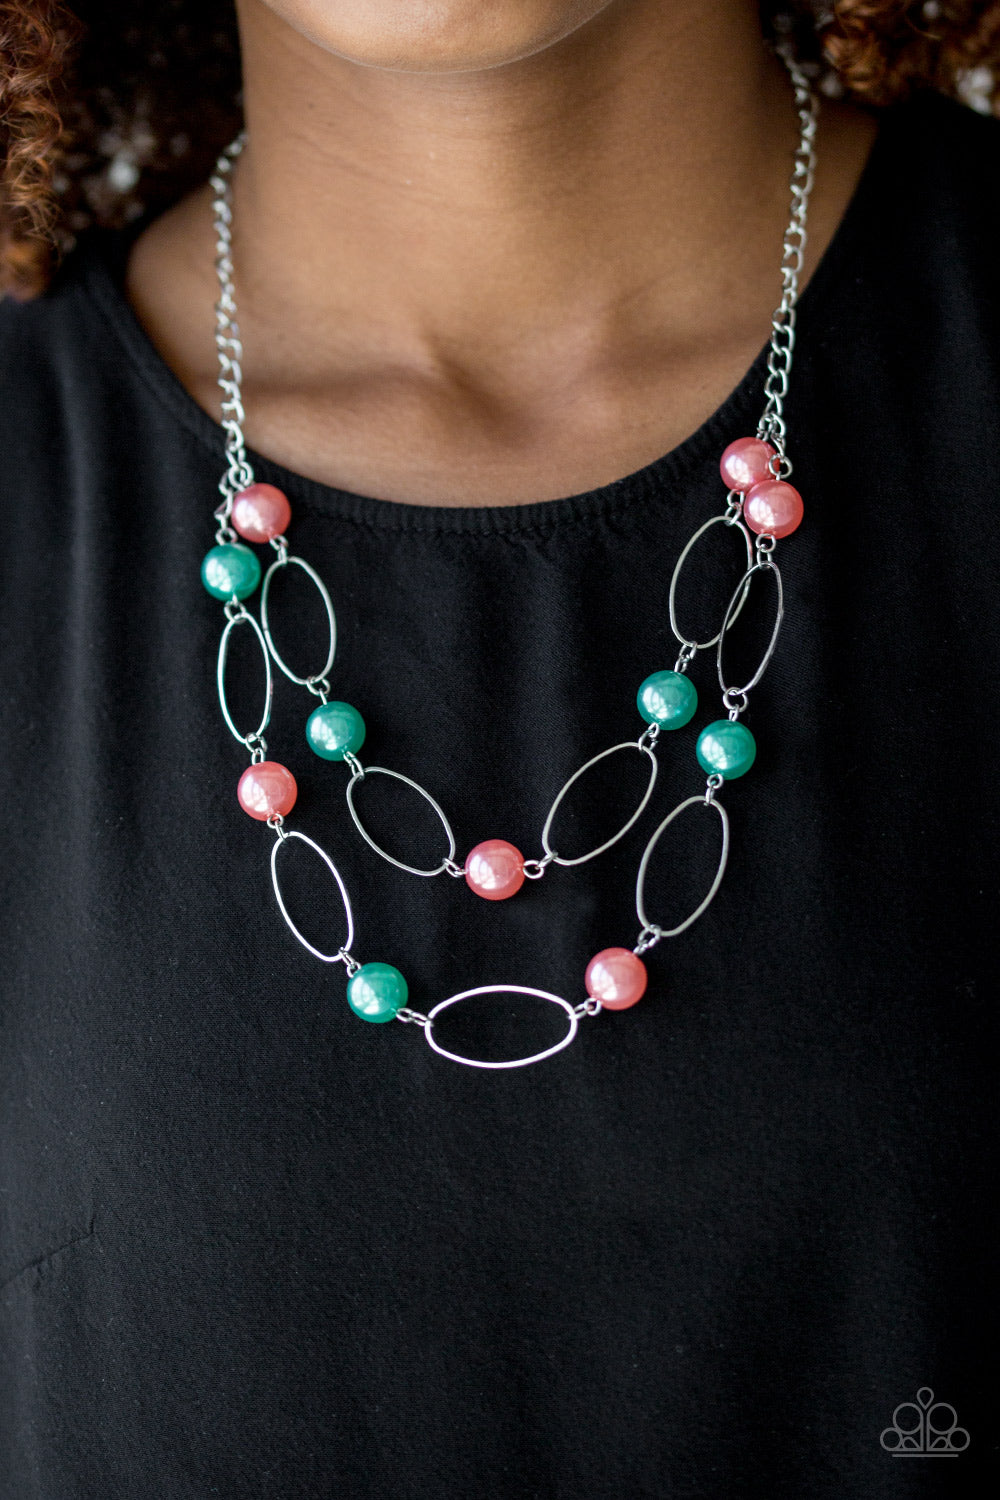 Best Of Both POSH-ible Worlds - Multicolor necklace